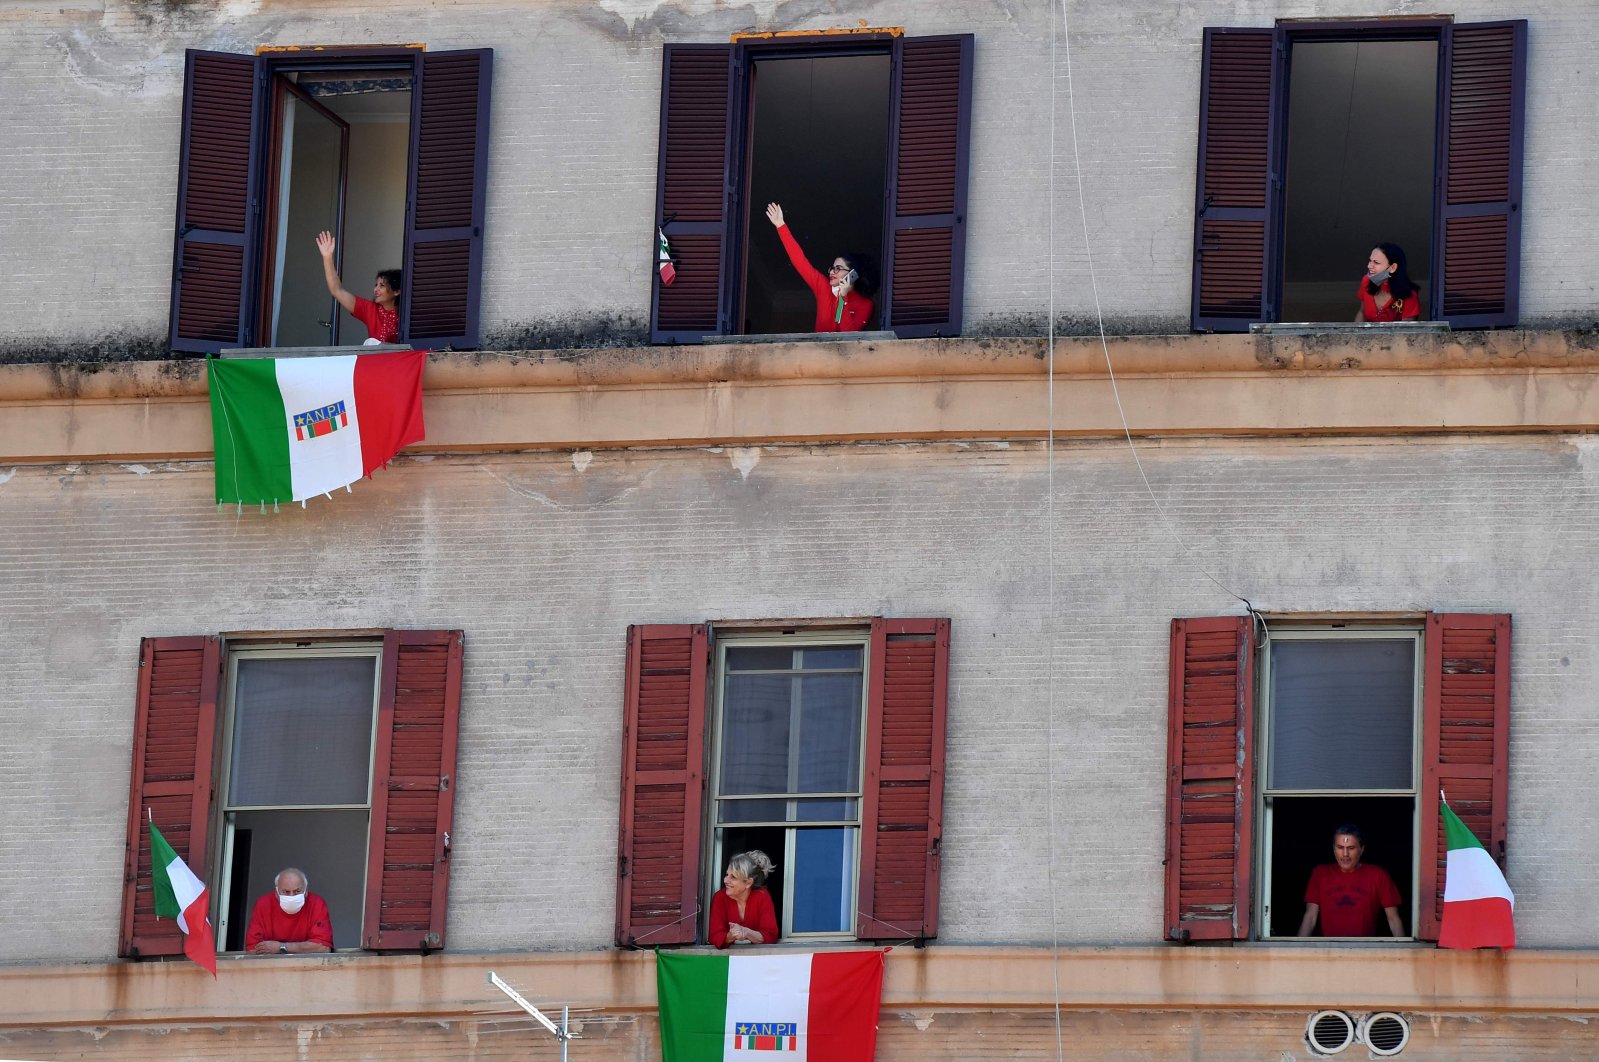 Residents with Italian flags sing Italian partizan song "Bella Ciao" in the Garbatella district of Rome, April 25, 2020. (AFP Photo)